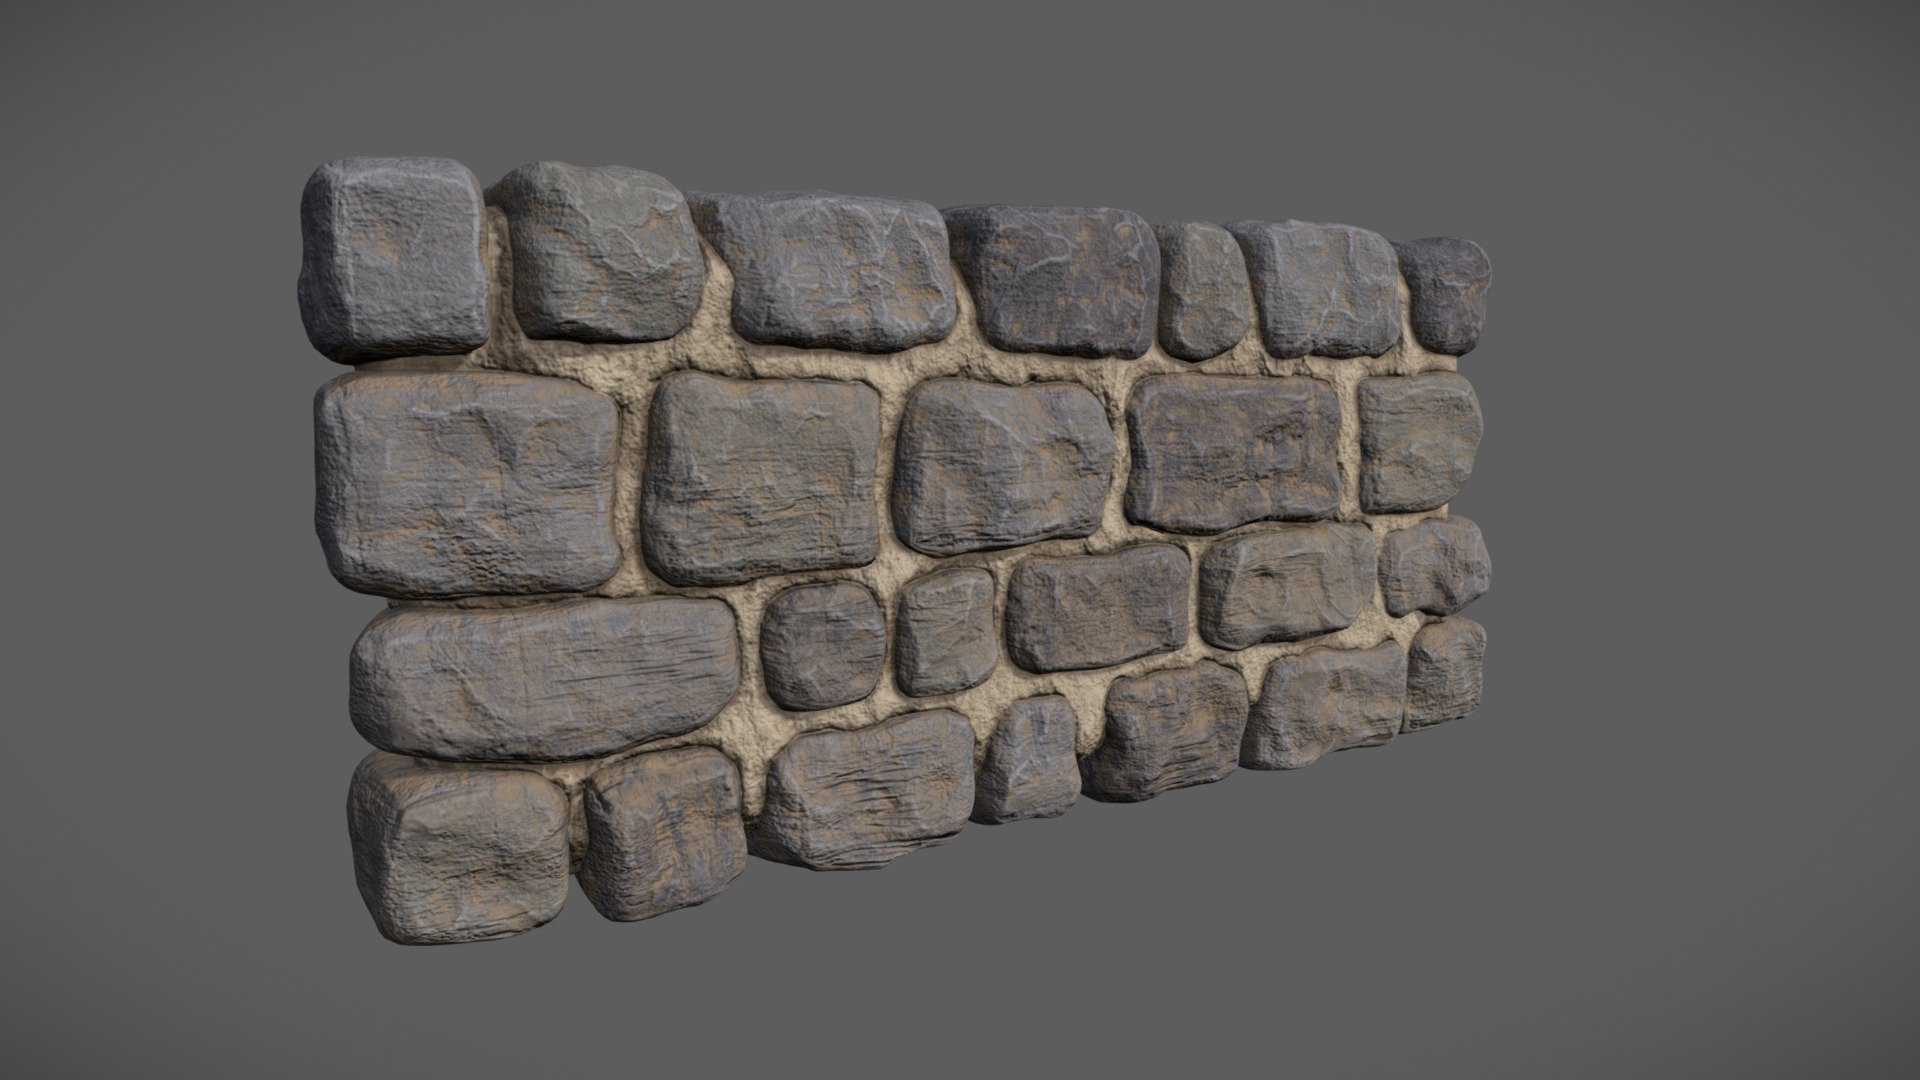 This is an old cobblestone wall that i designed for 3D printing and decided to texture it for practise. Turned out alot better than i planned. Modelled in Maya, sculpted in Zbrush, textured in Substance Painter 3d model